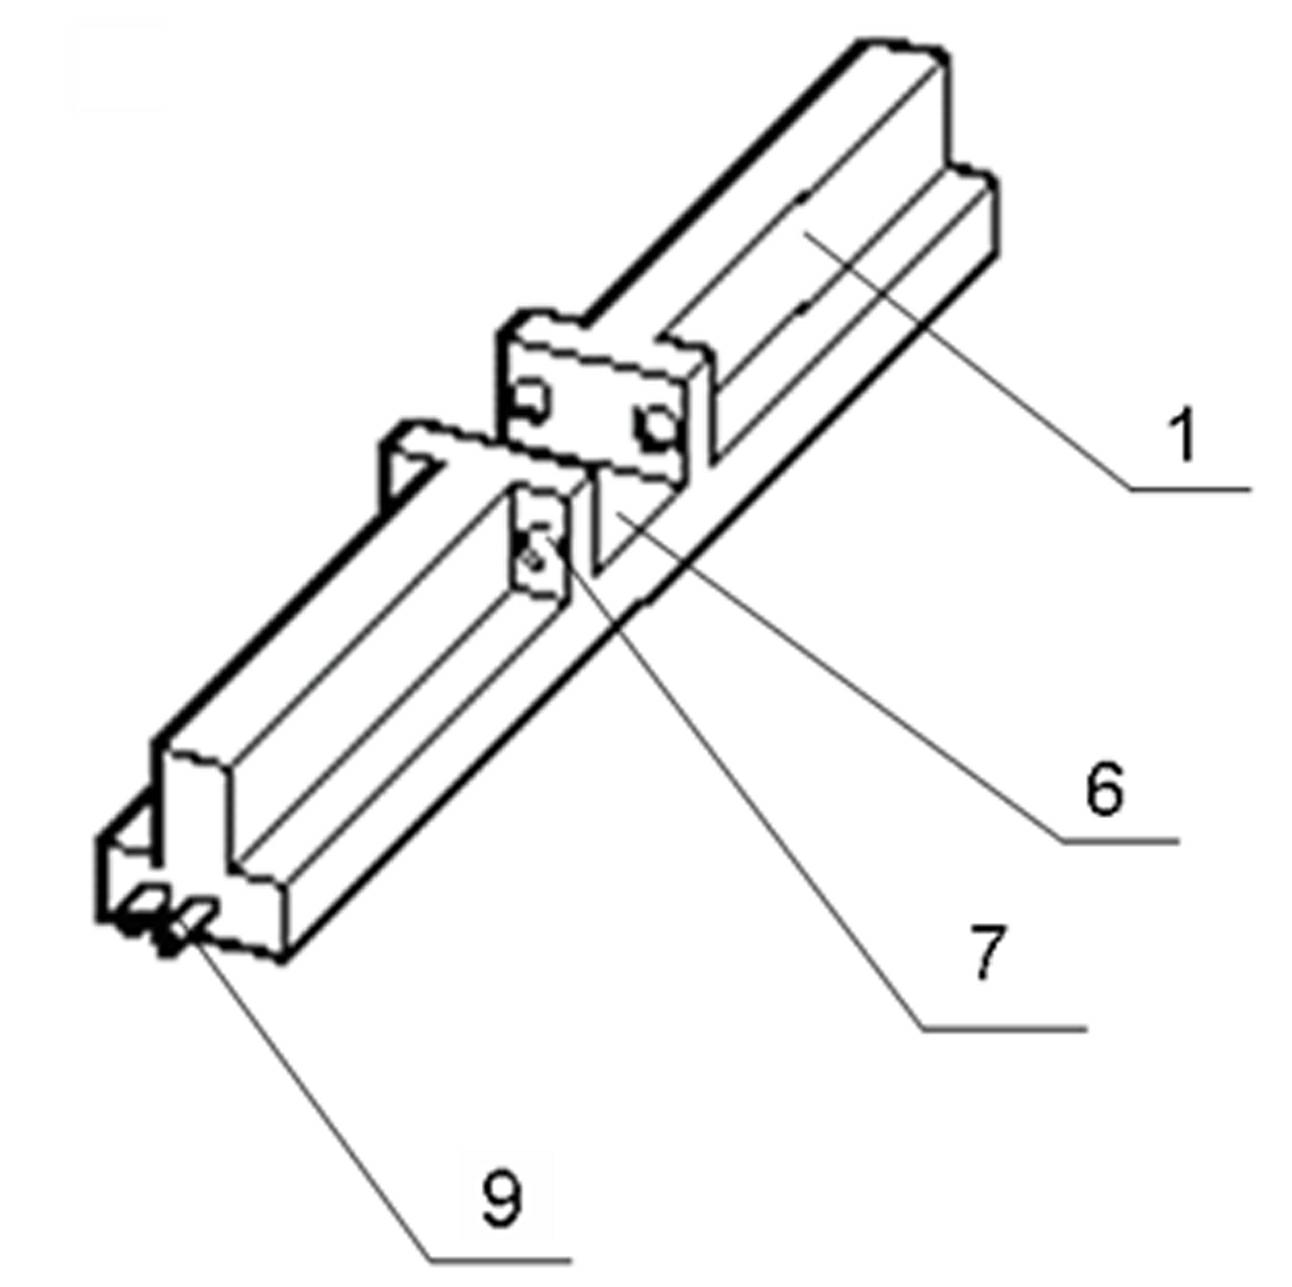 Assembling anchor rod or anchor cable frame